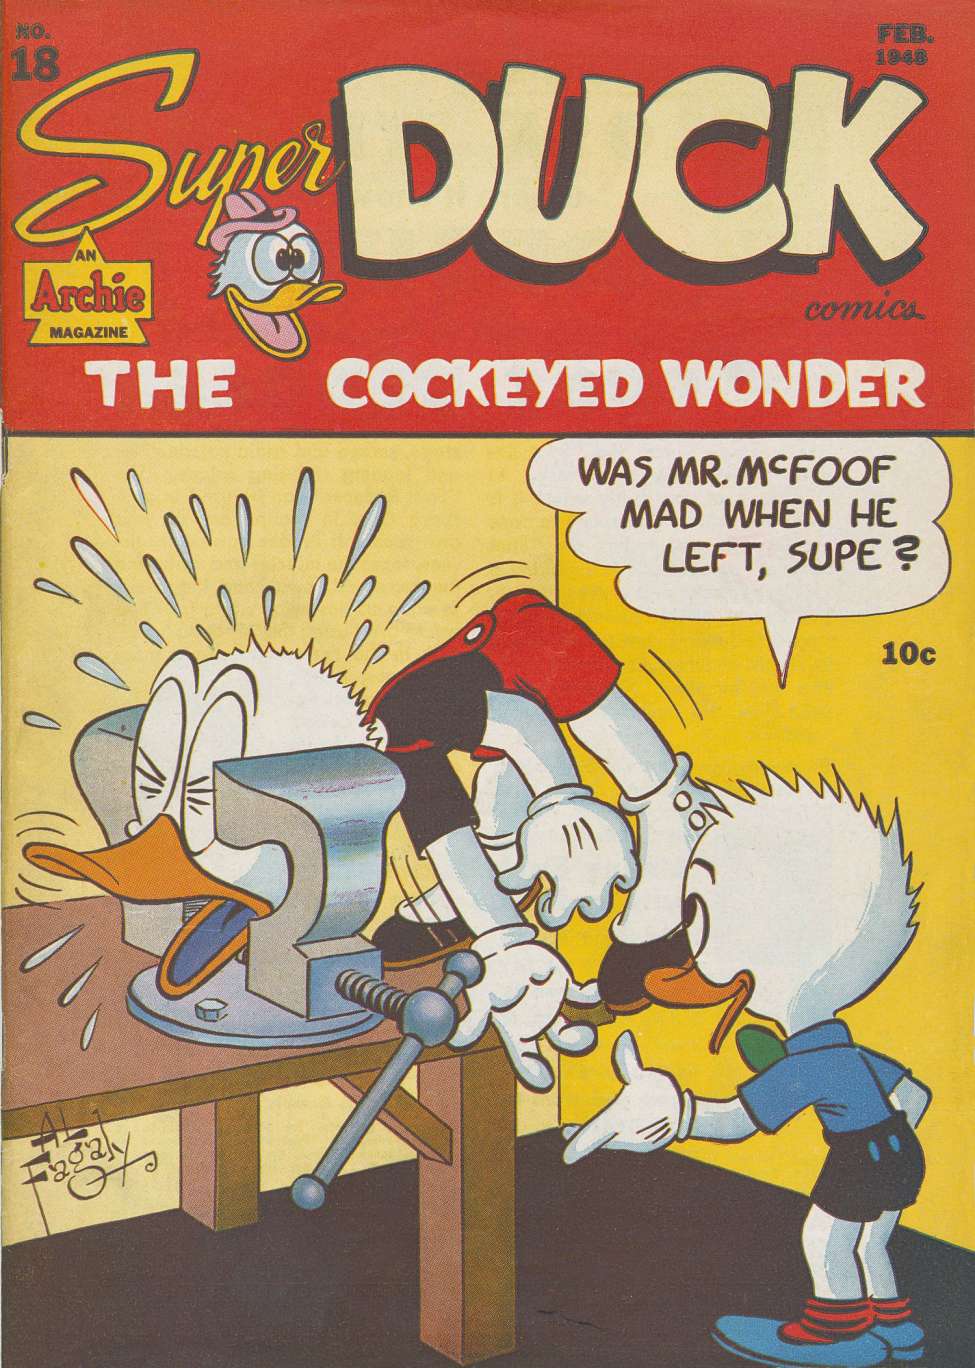 Book Cover For Super Duck 18 - Version 2